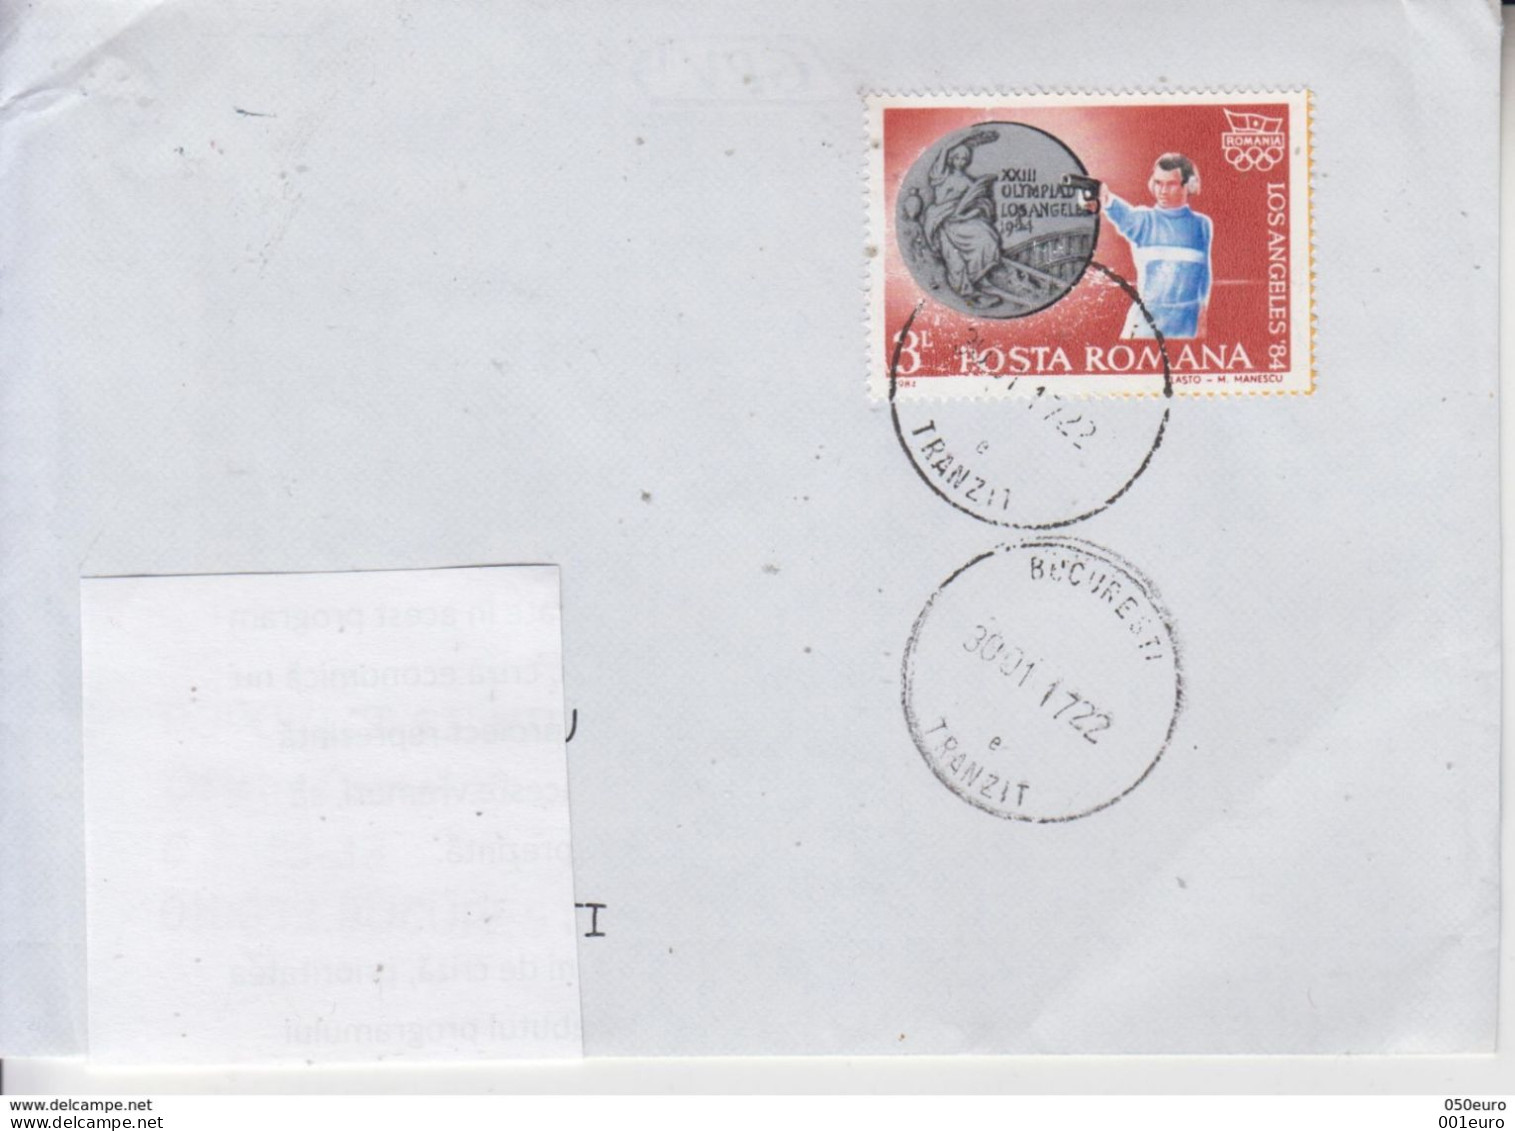 ROMANIA: LOS ANGELES OLYMPIADE - PISTOL SHOOTING On Cover Circulated In ROMANIA #427814367 - Registered Shipping! - Covers & Documents